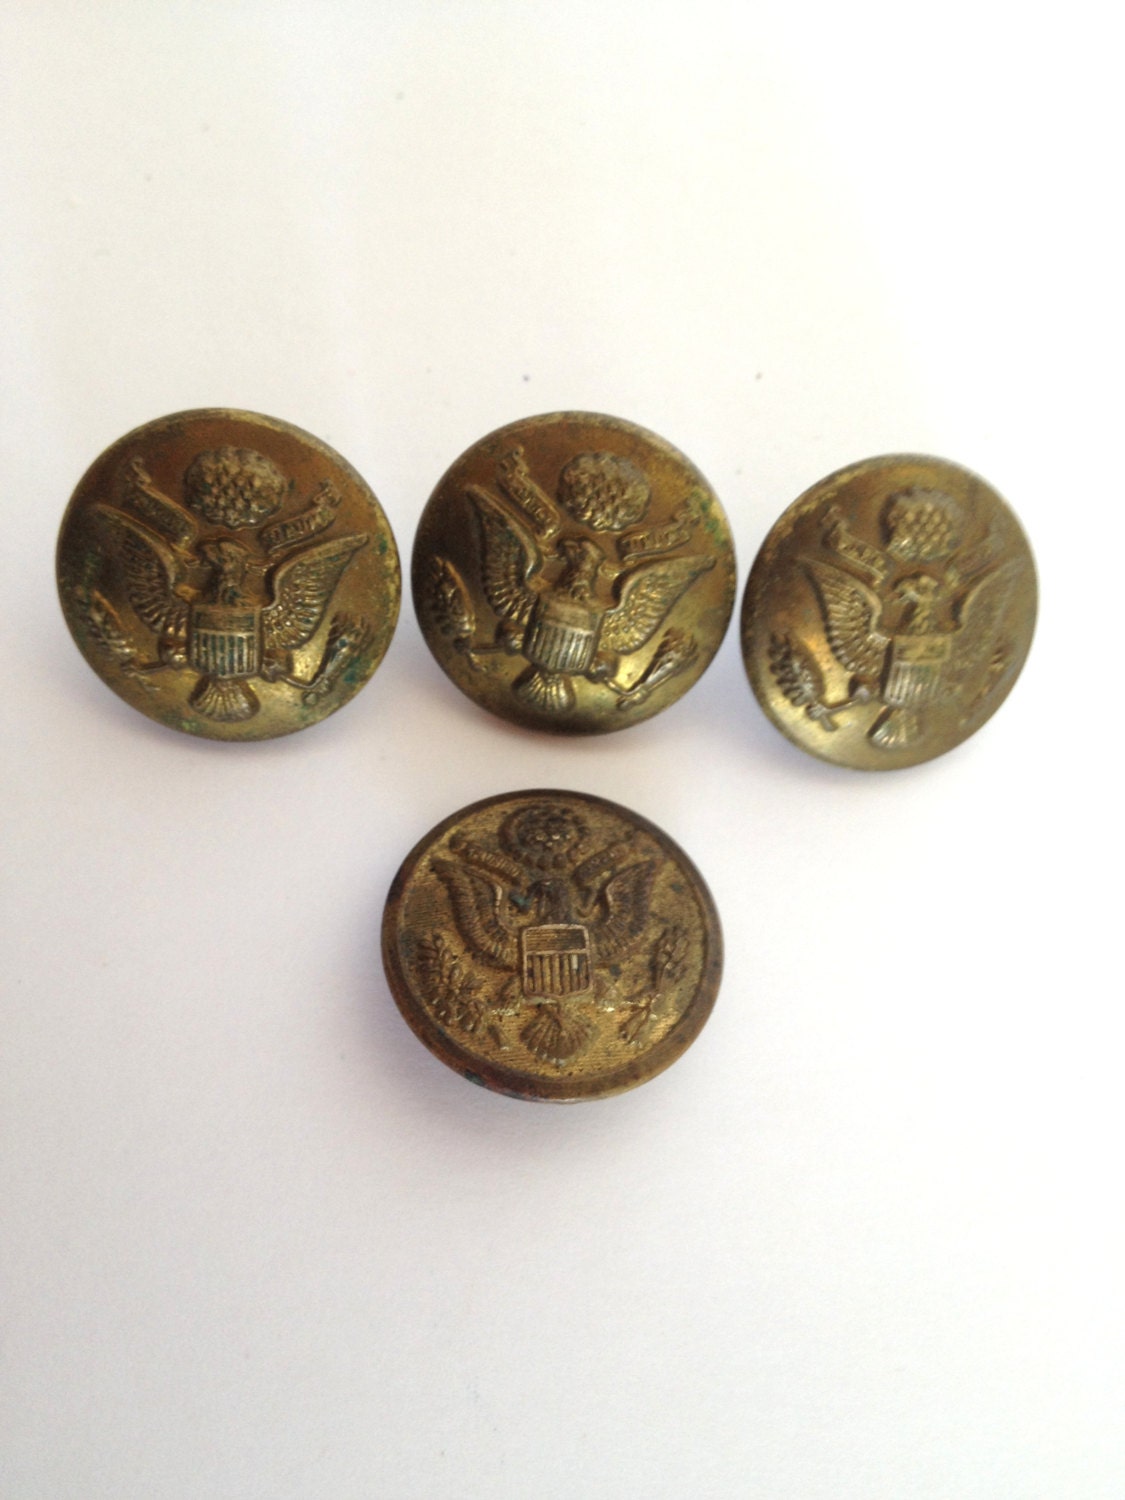 4 Vintage Brass Military Buttons Gaunt London by trailsofthewest